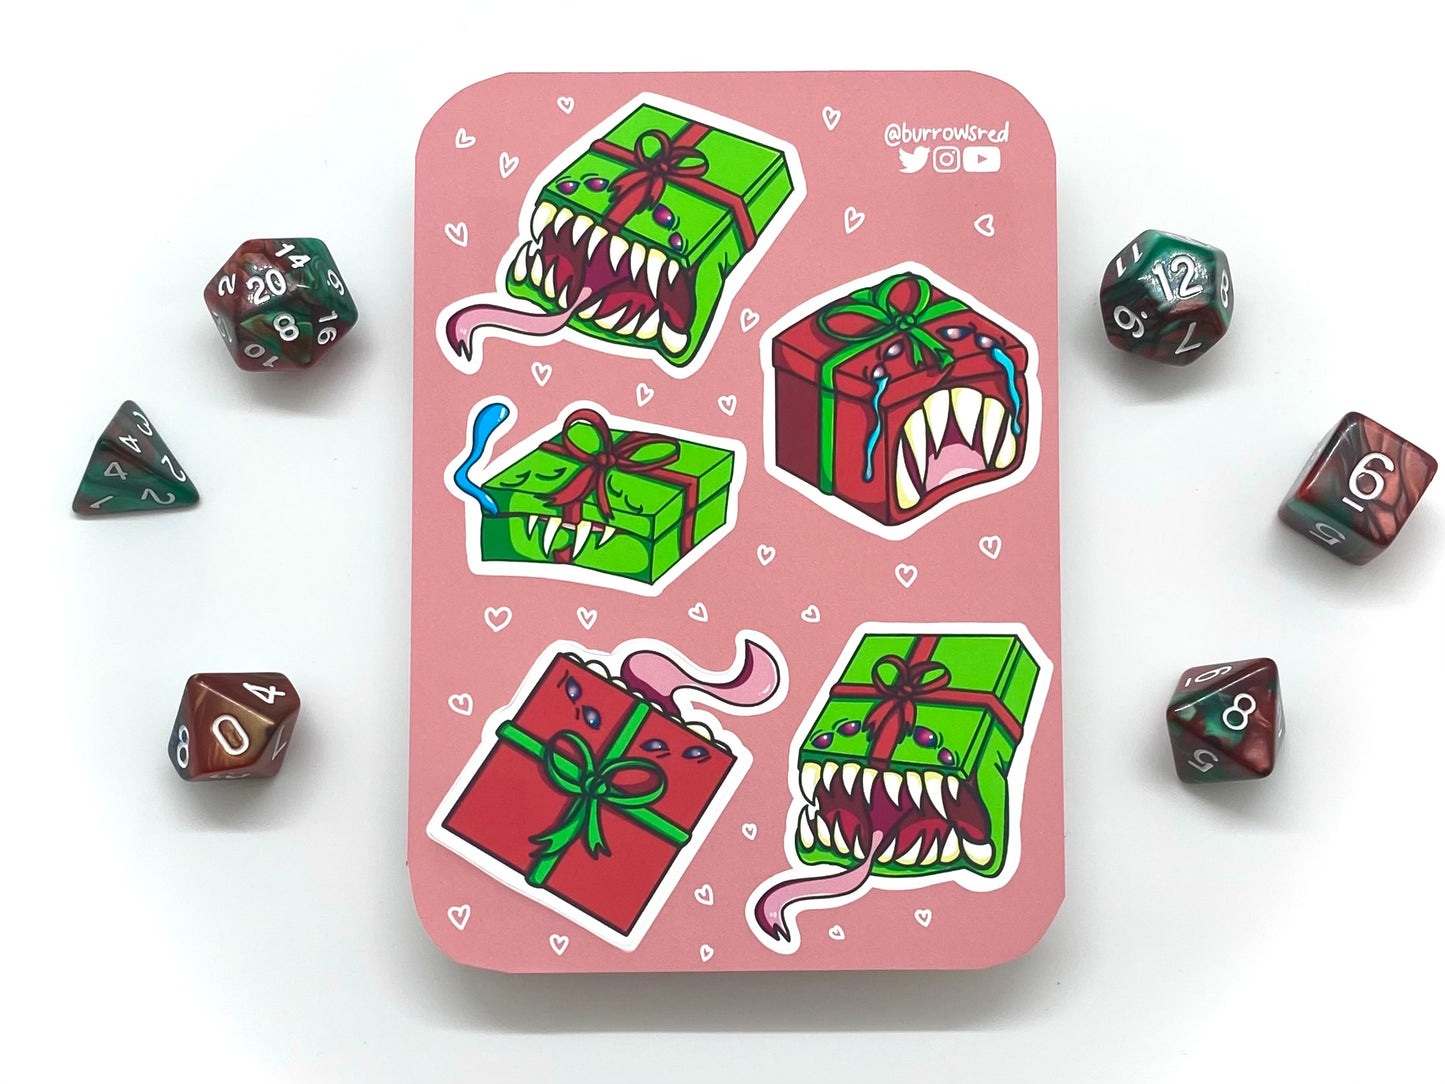 Gift of a Mimic for Christmas - Sticker Sheet